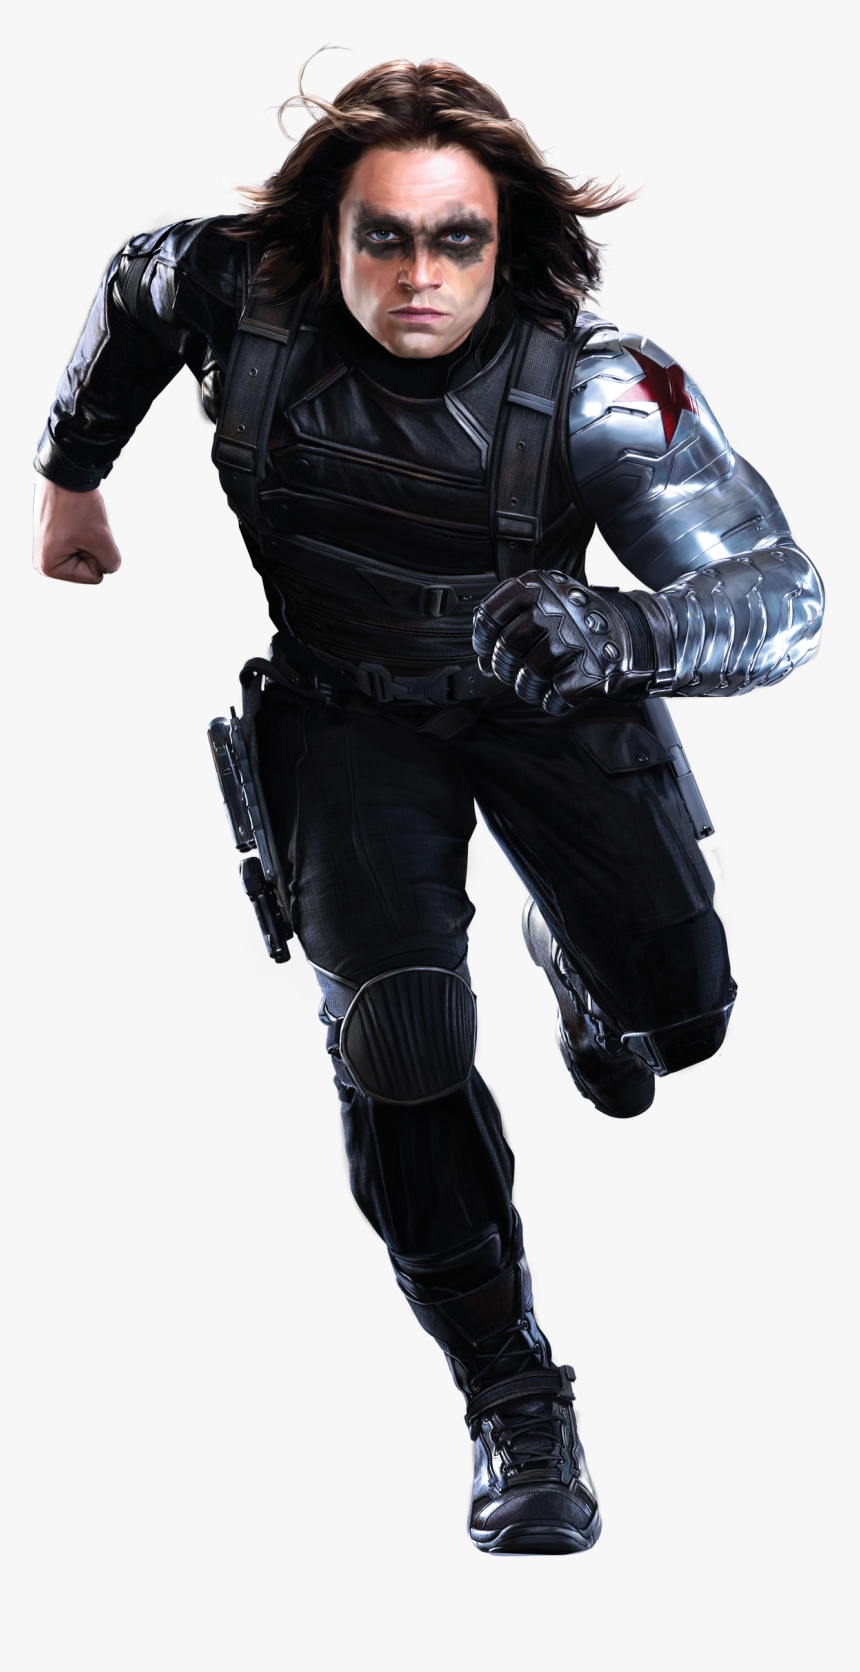 Bucky Barnes The Winter Soldier - Winter Soldier Hd Png, Transparent Png, Free Download